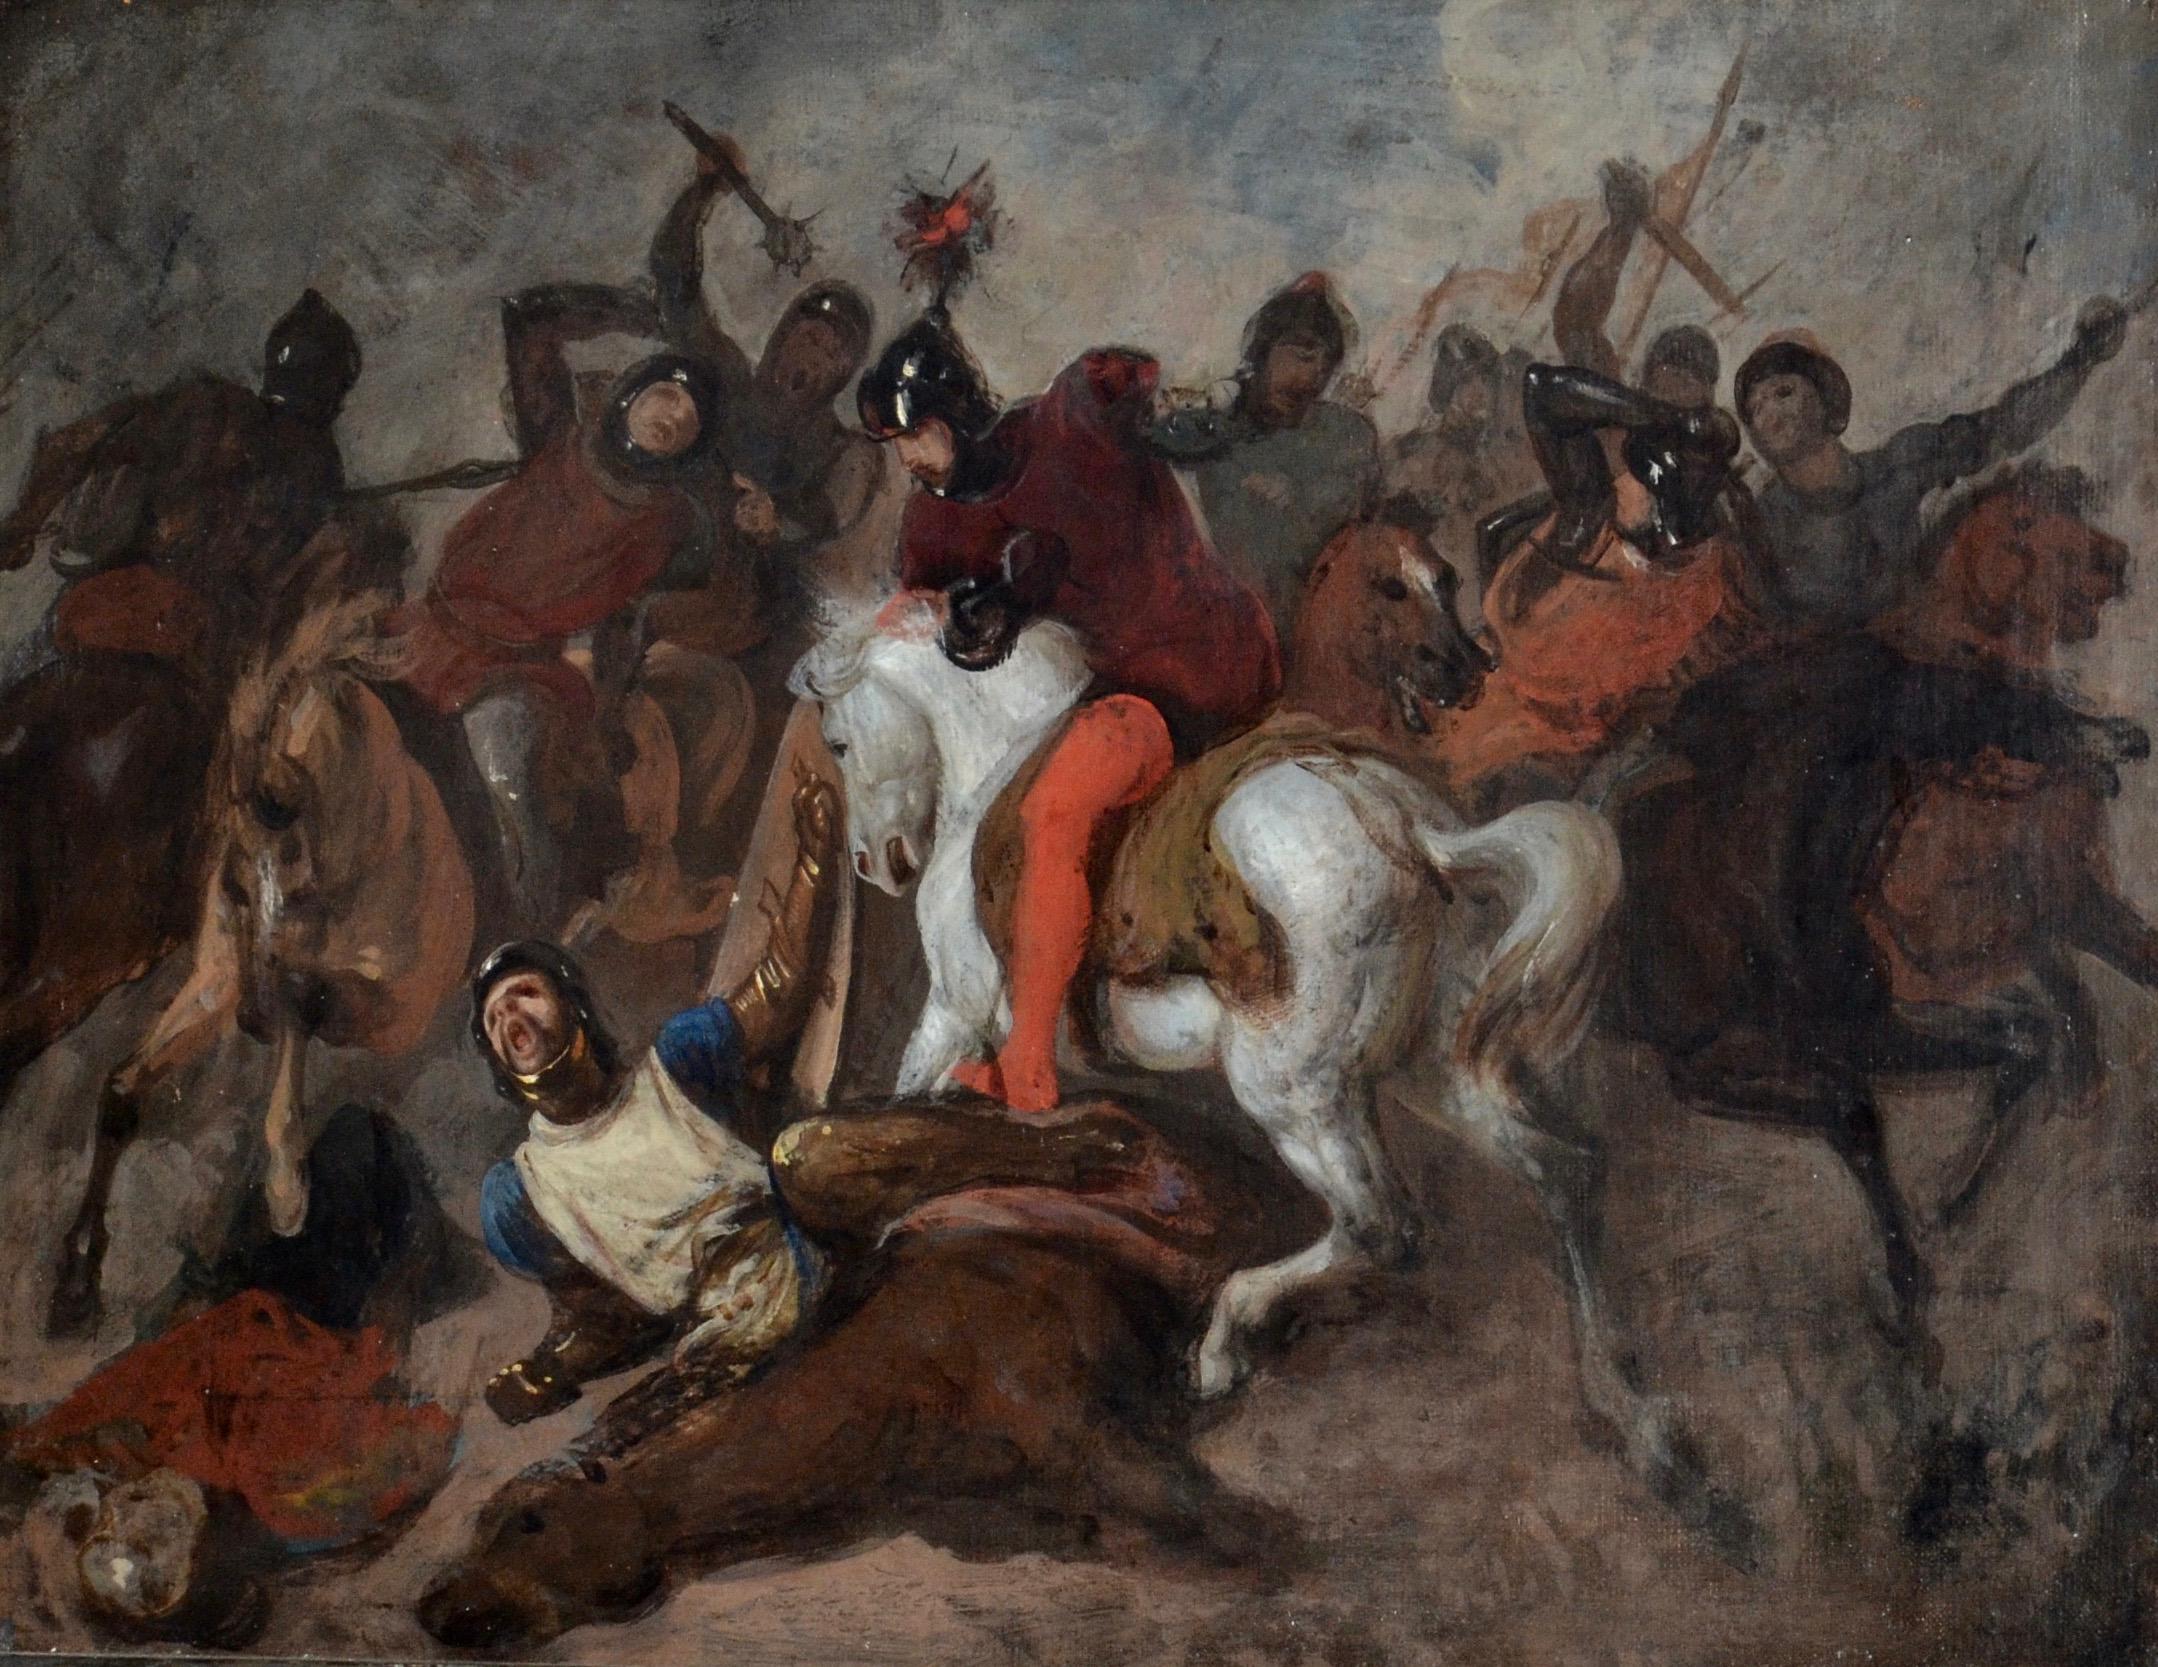 Eugene Delacroix (manner of) Figurative Painting - The Battle - Soldiers riding horses in the heat of a violent battle 19th century